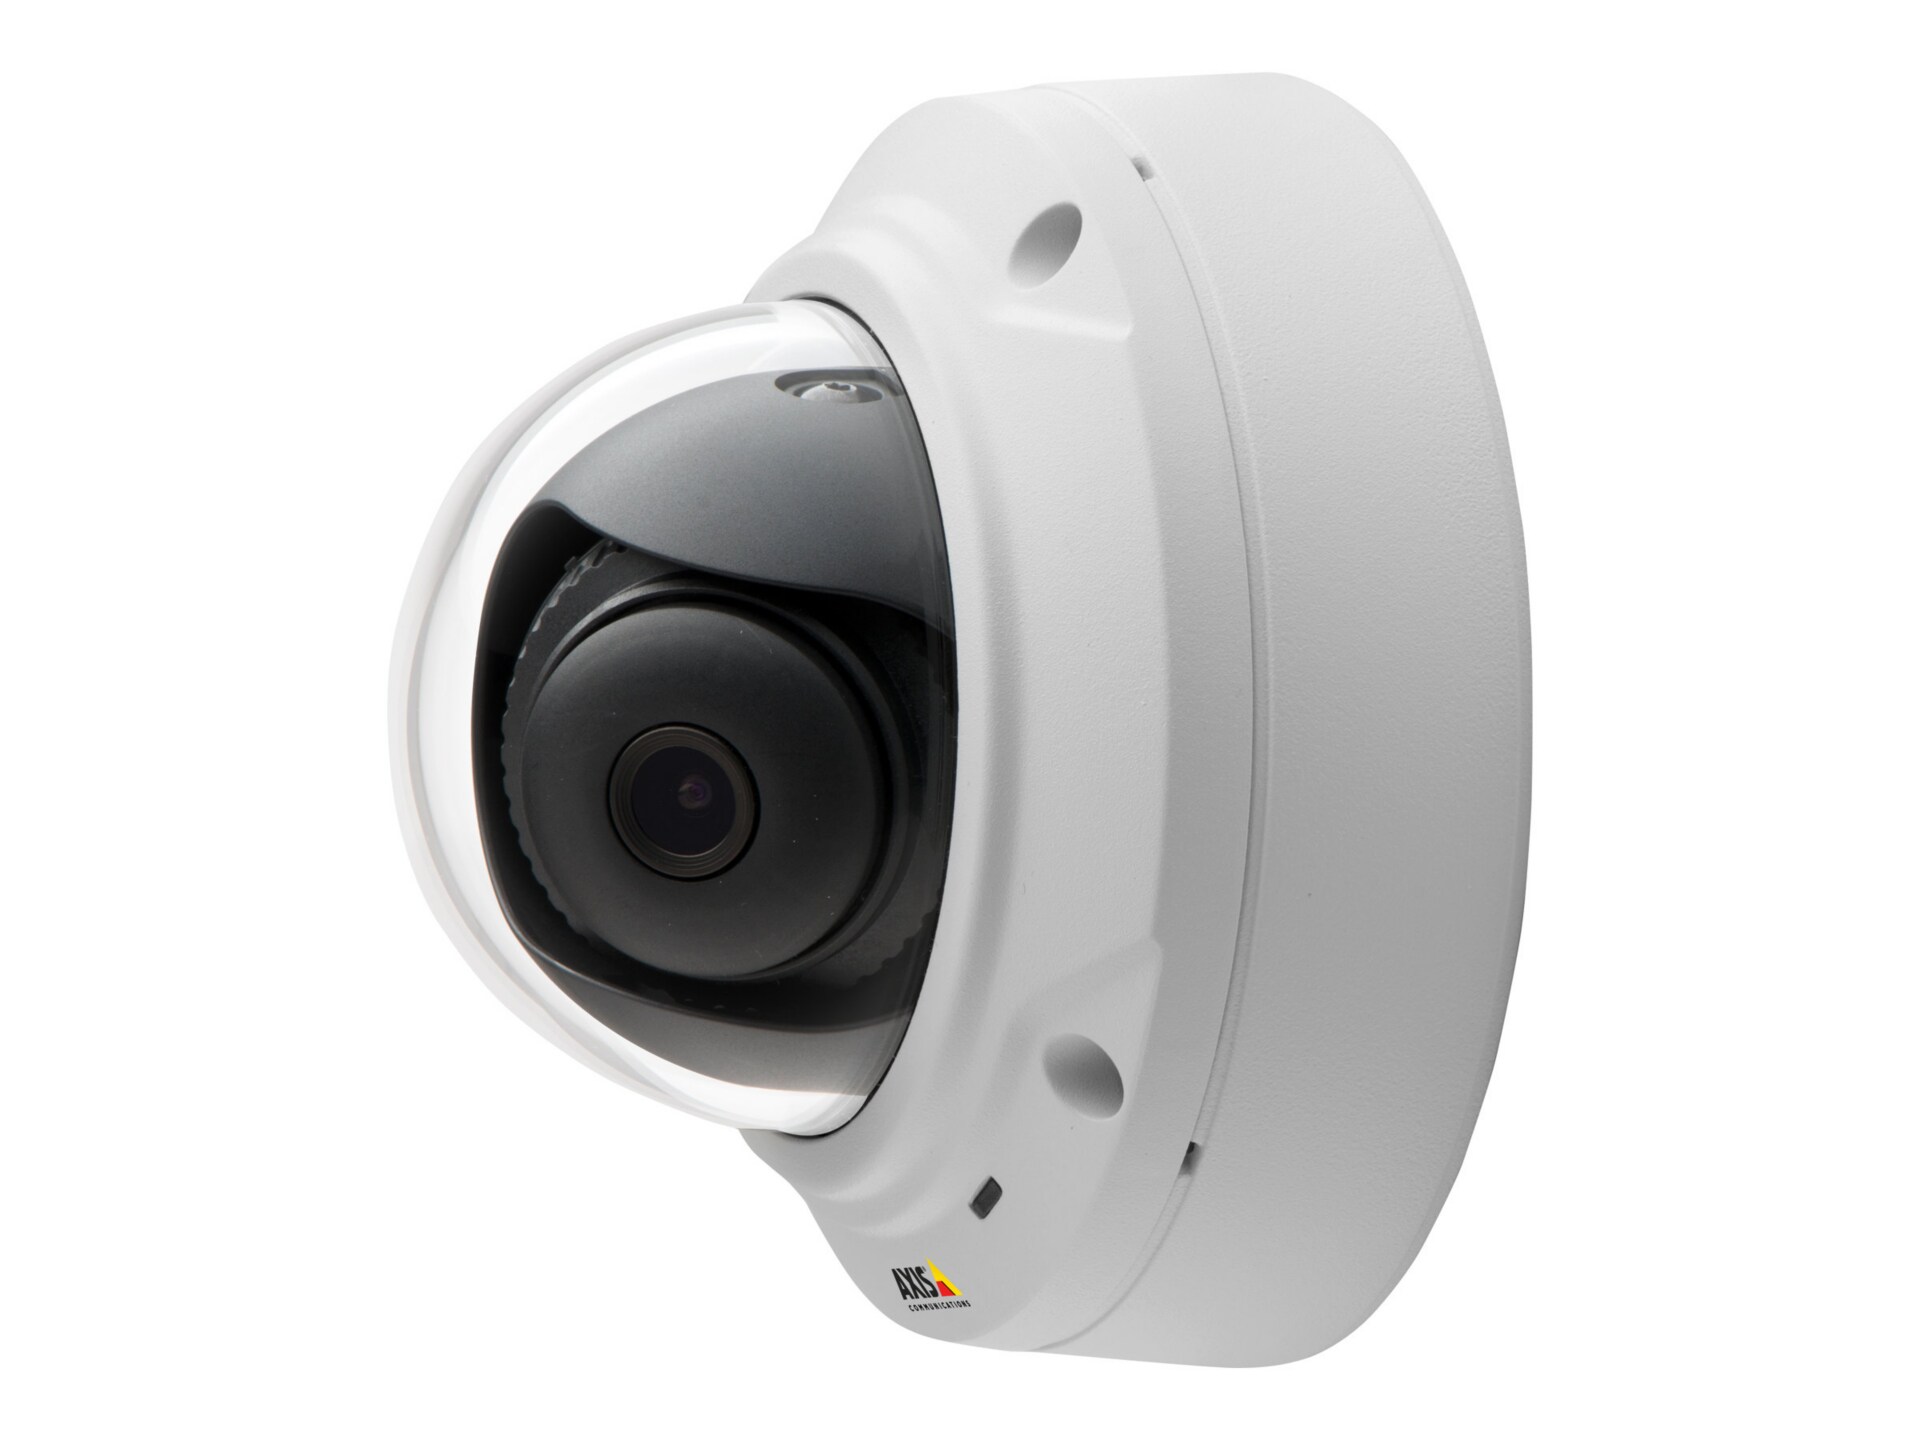 AXIS M3025-VE Fixed Dome Network Camera